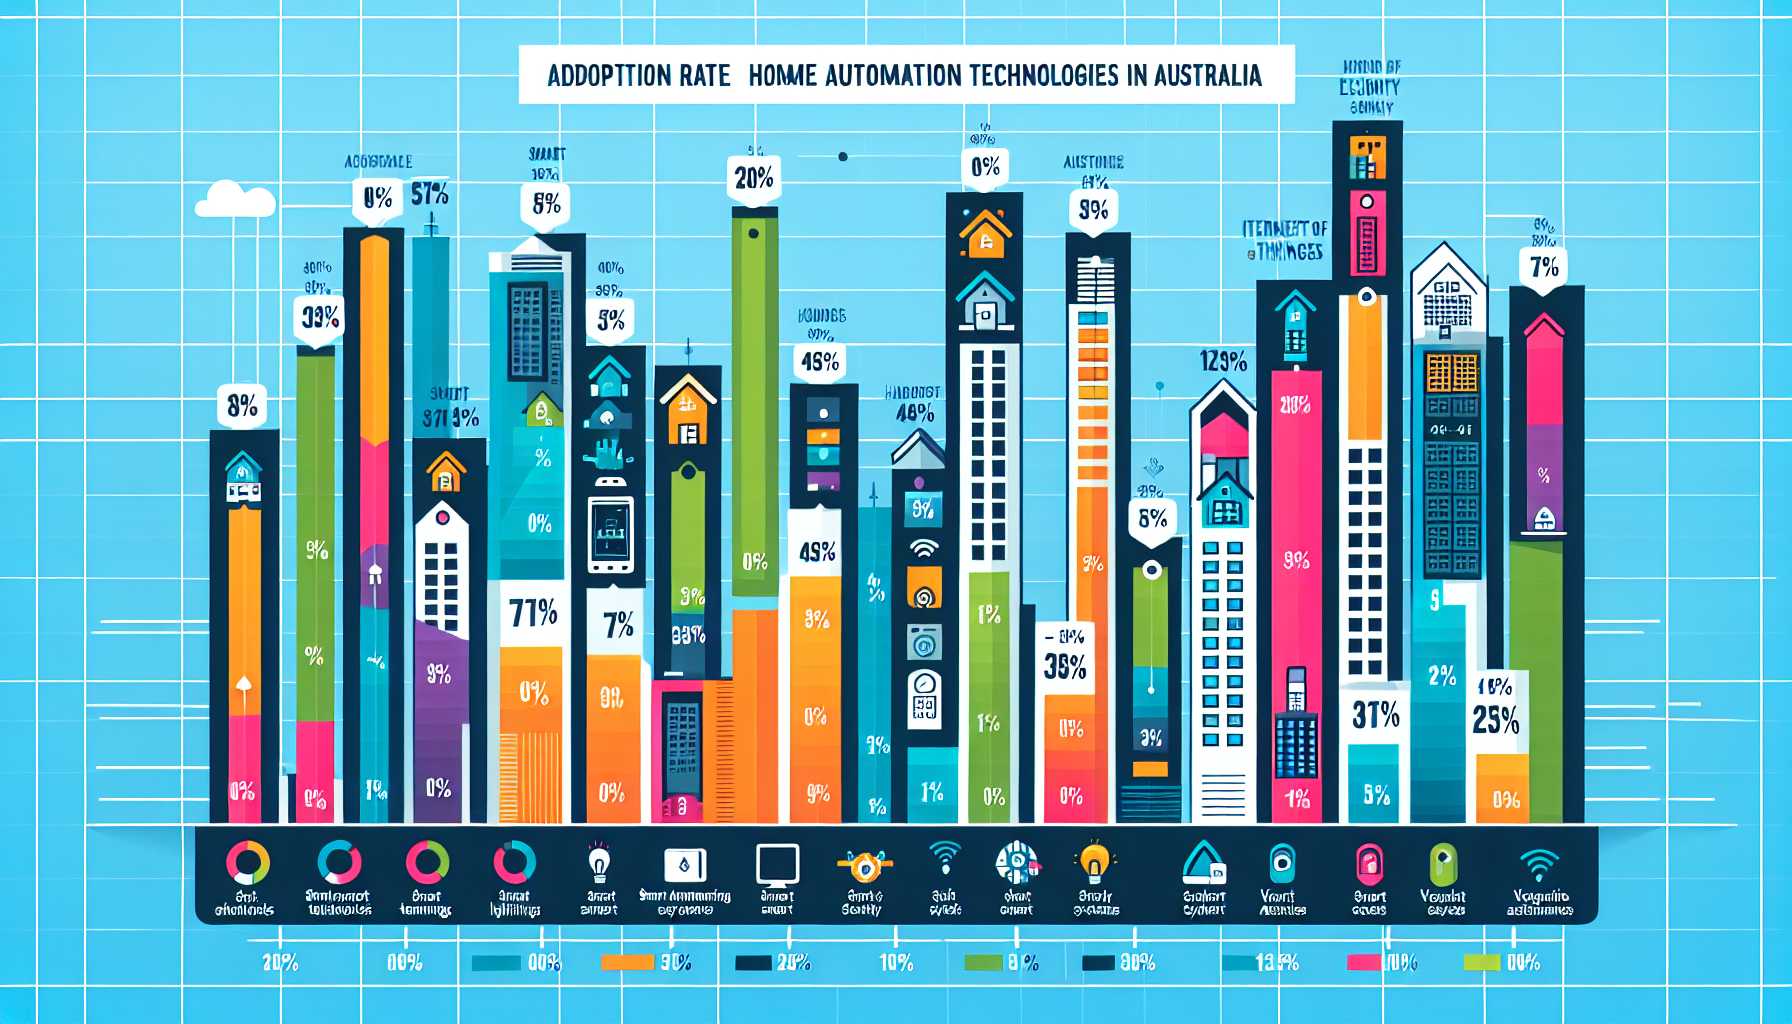 Adoption rate of home automation technologies in Australia